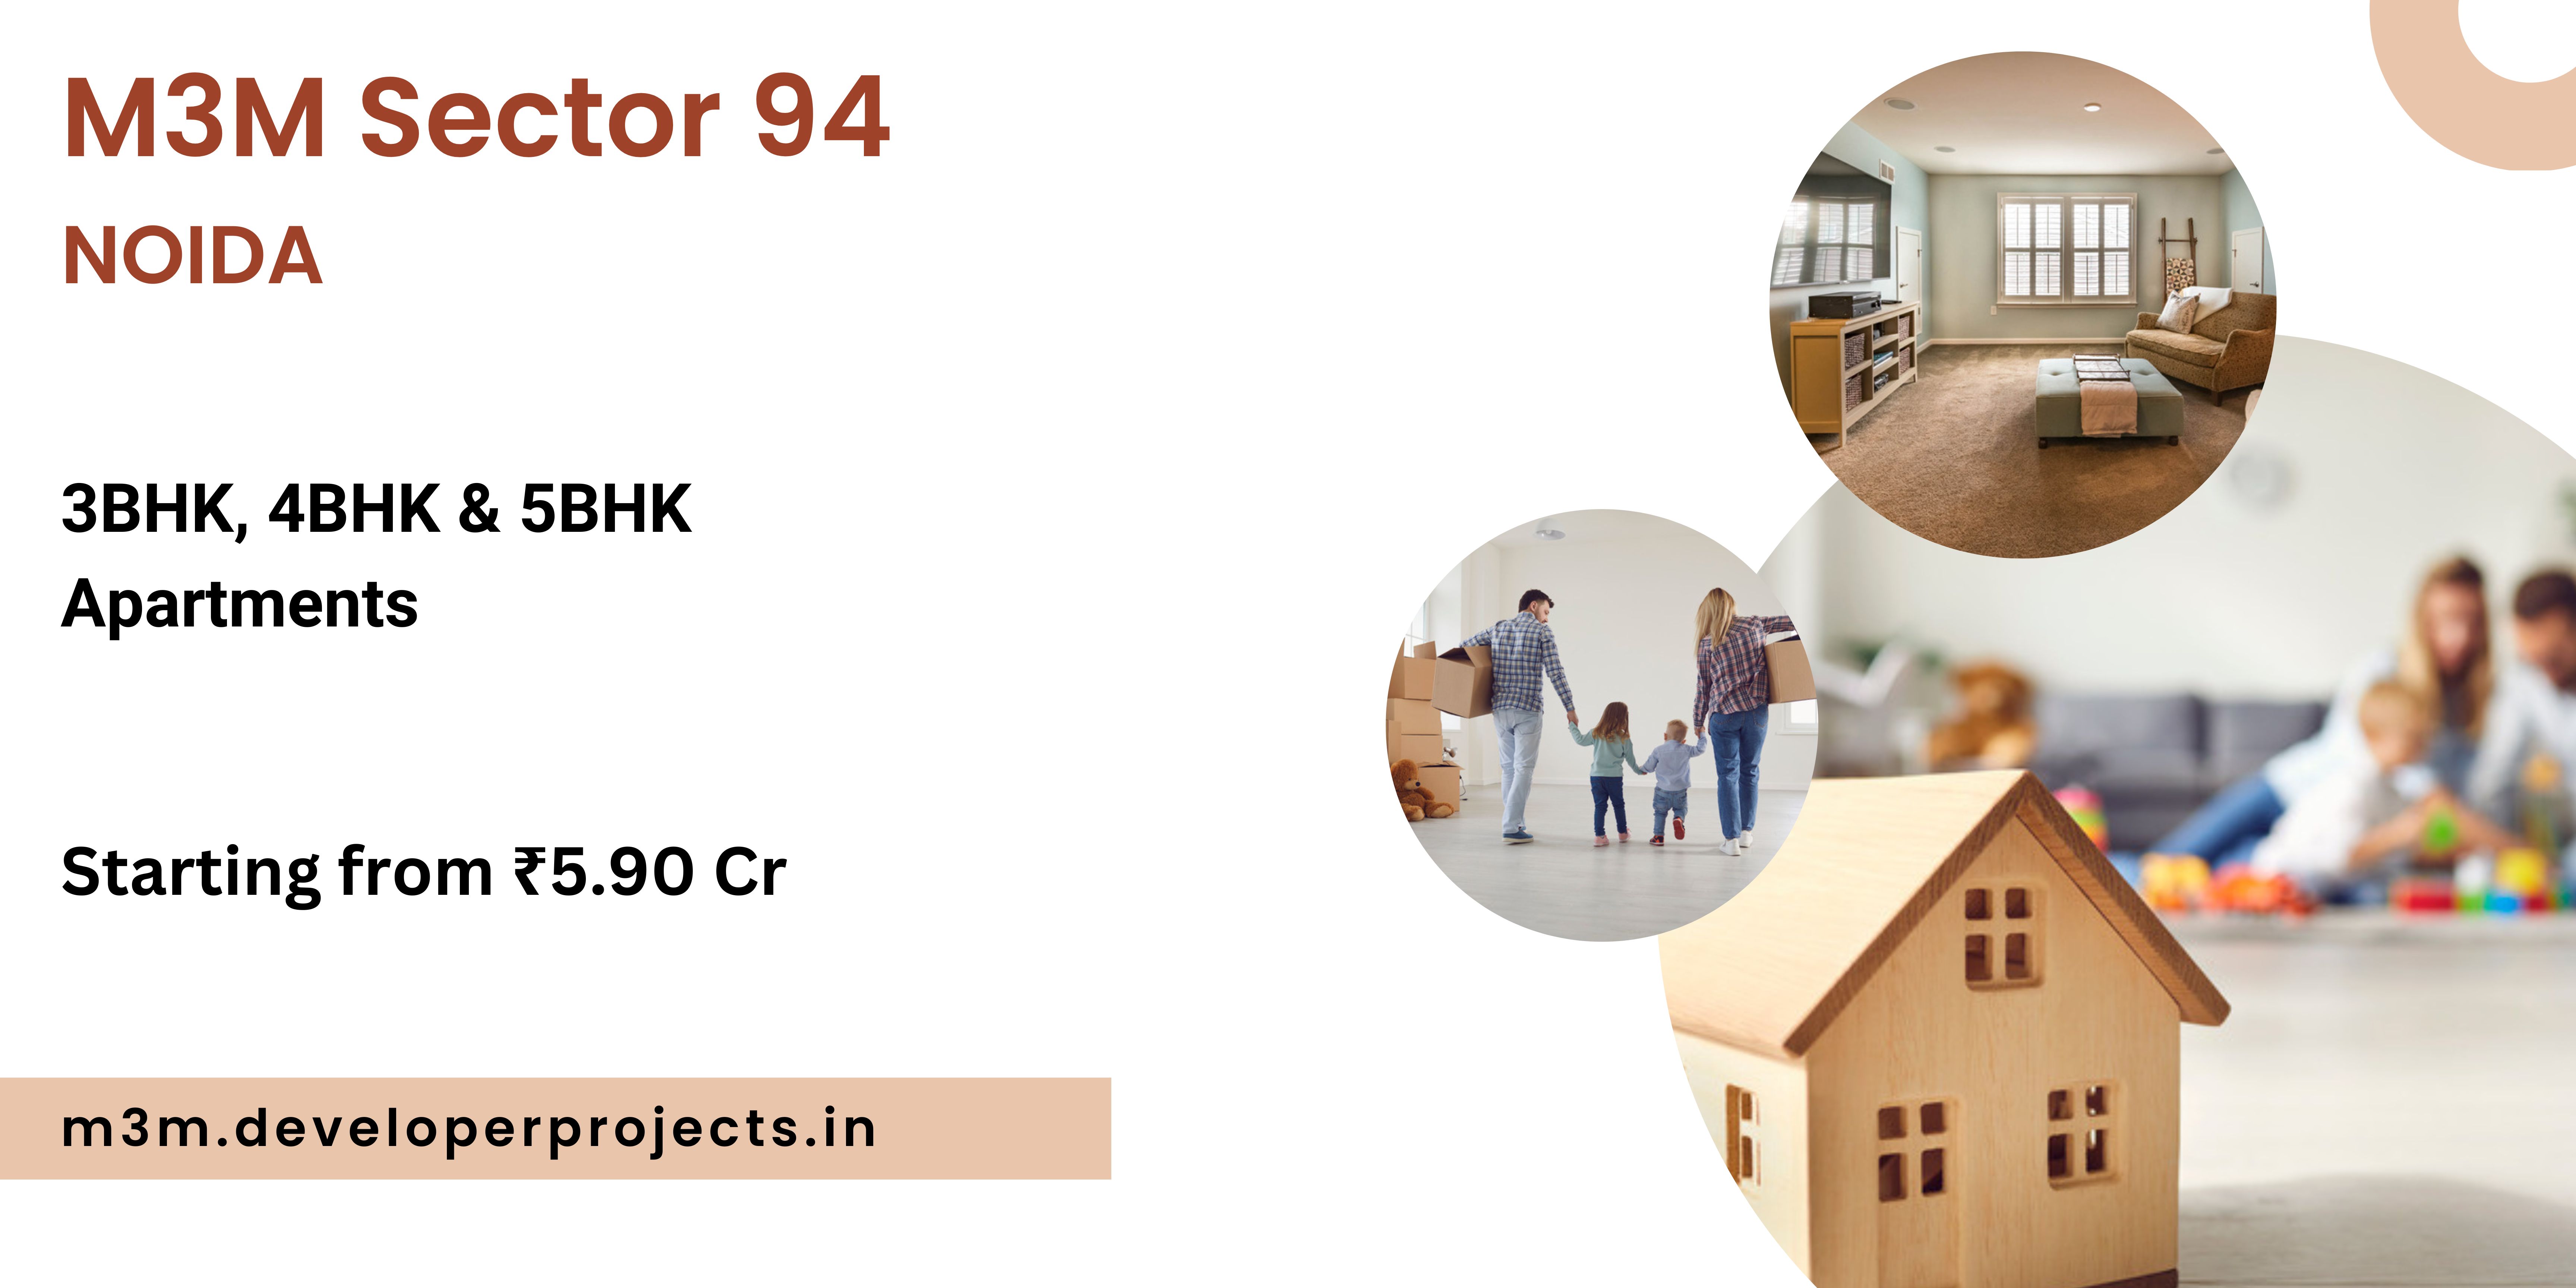 M3M Sector 94 Noida | The Convenience at Your Service